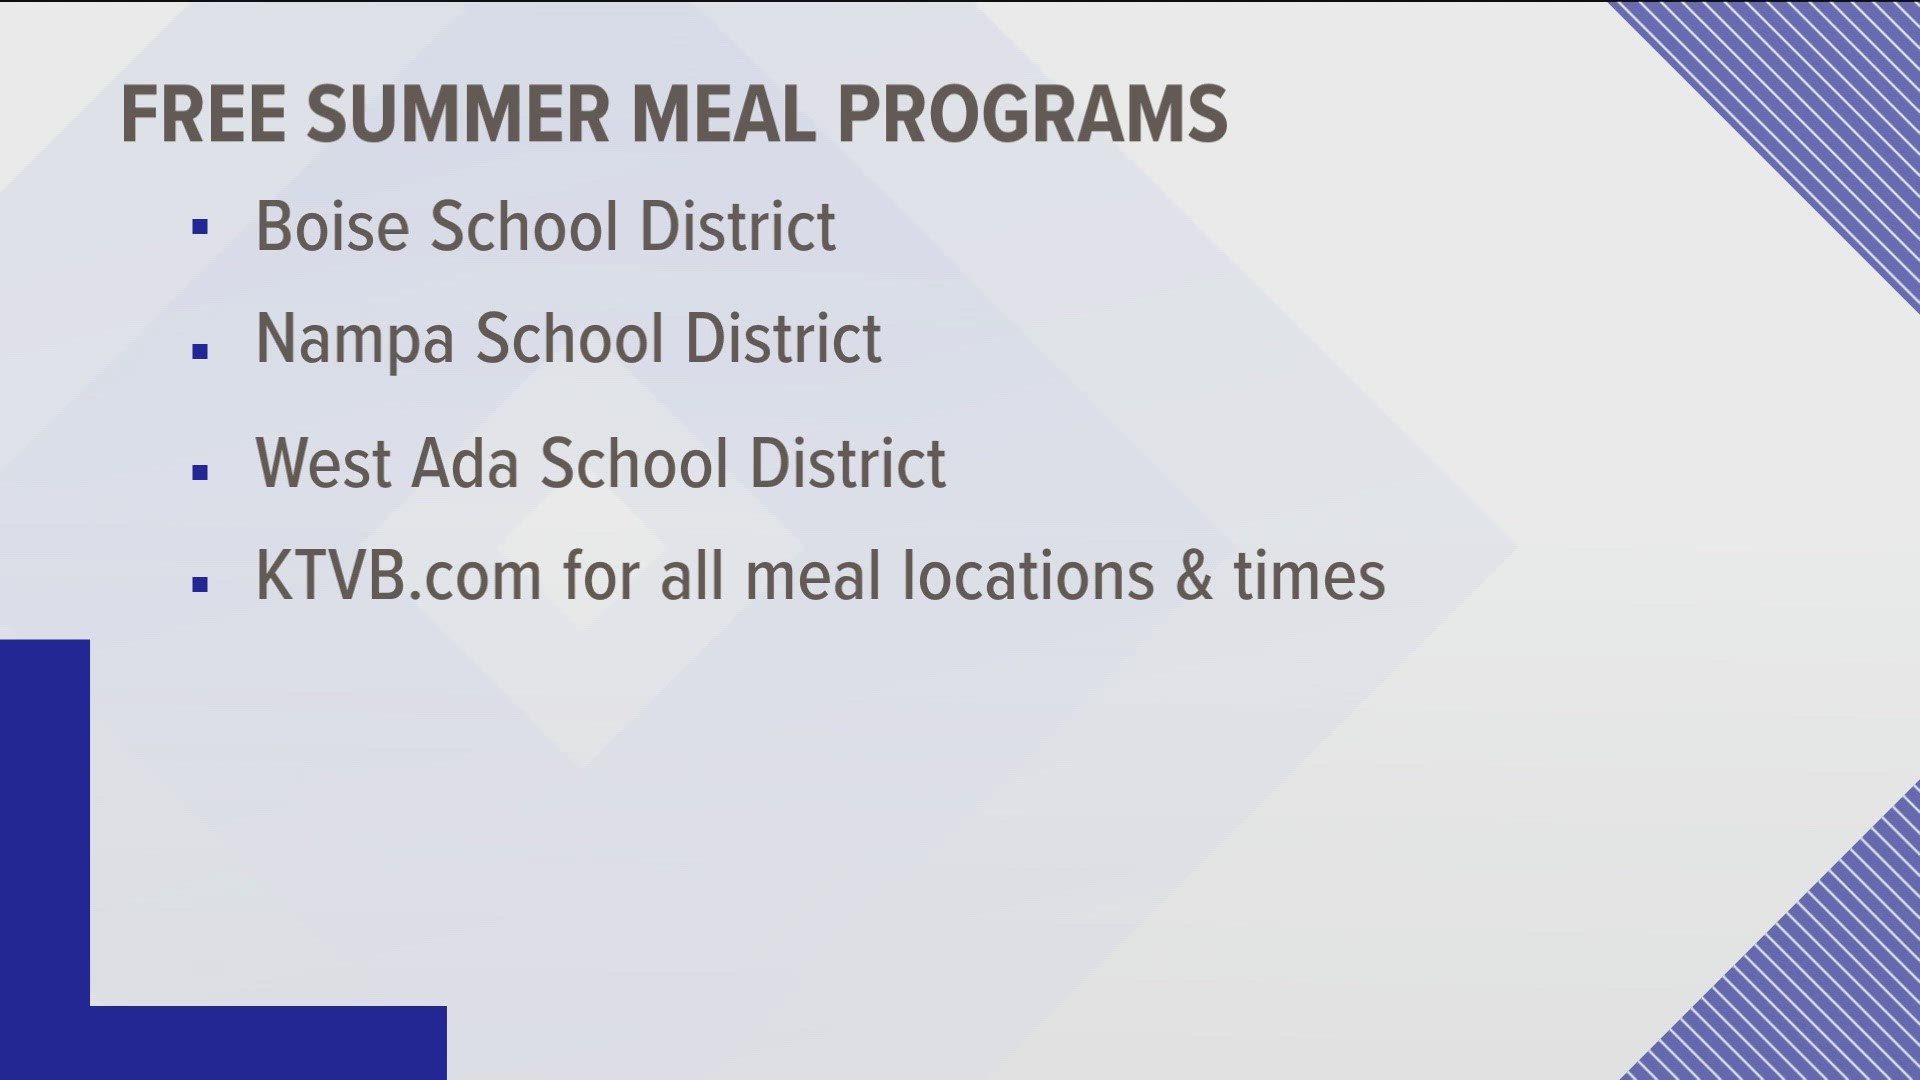 Any kid from the district ages one thru 18 can get free breakfast and lunches at different schools throughout the Summer.